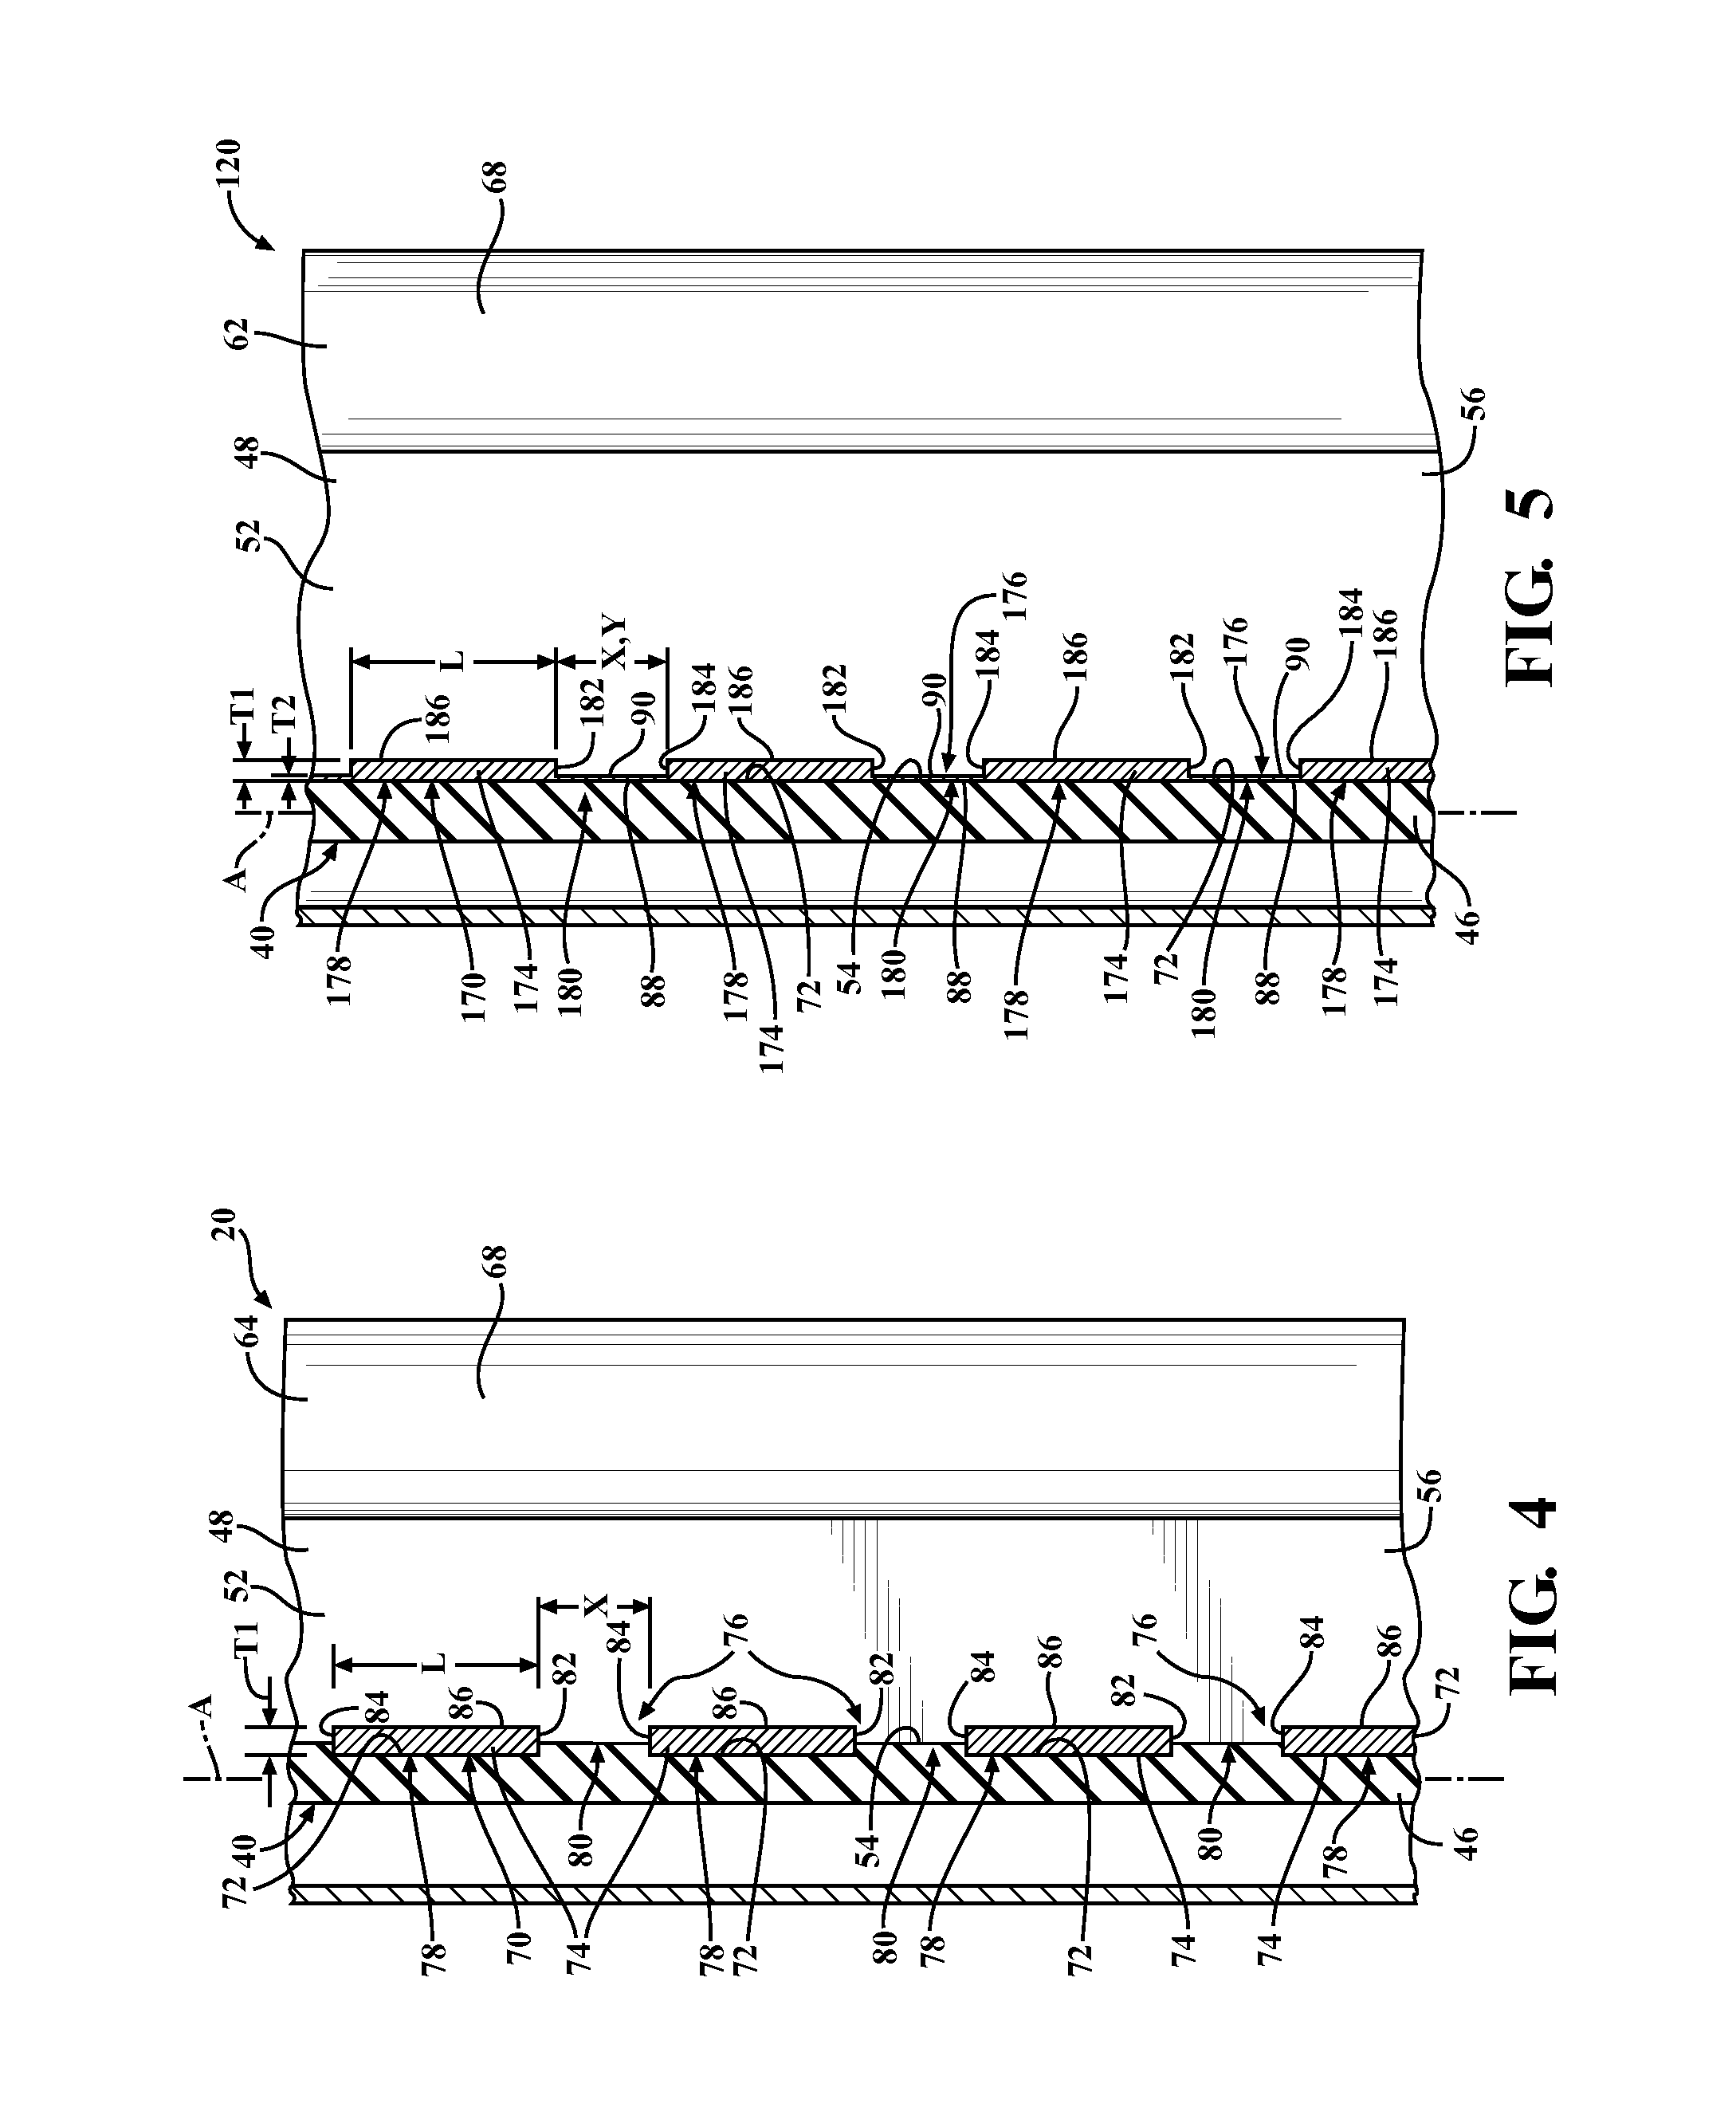 Weatherstrip assembly for sealing between a frame and a closure member and a method for producing the same